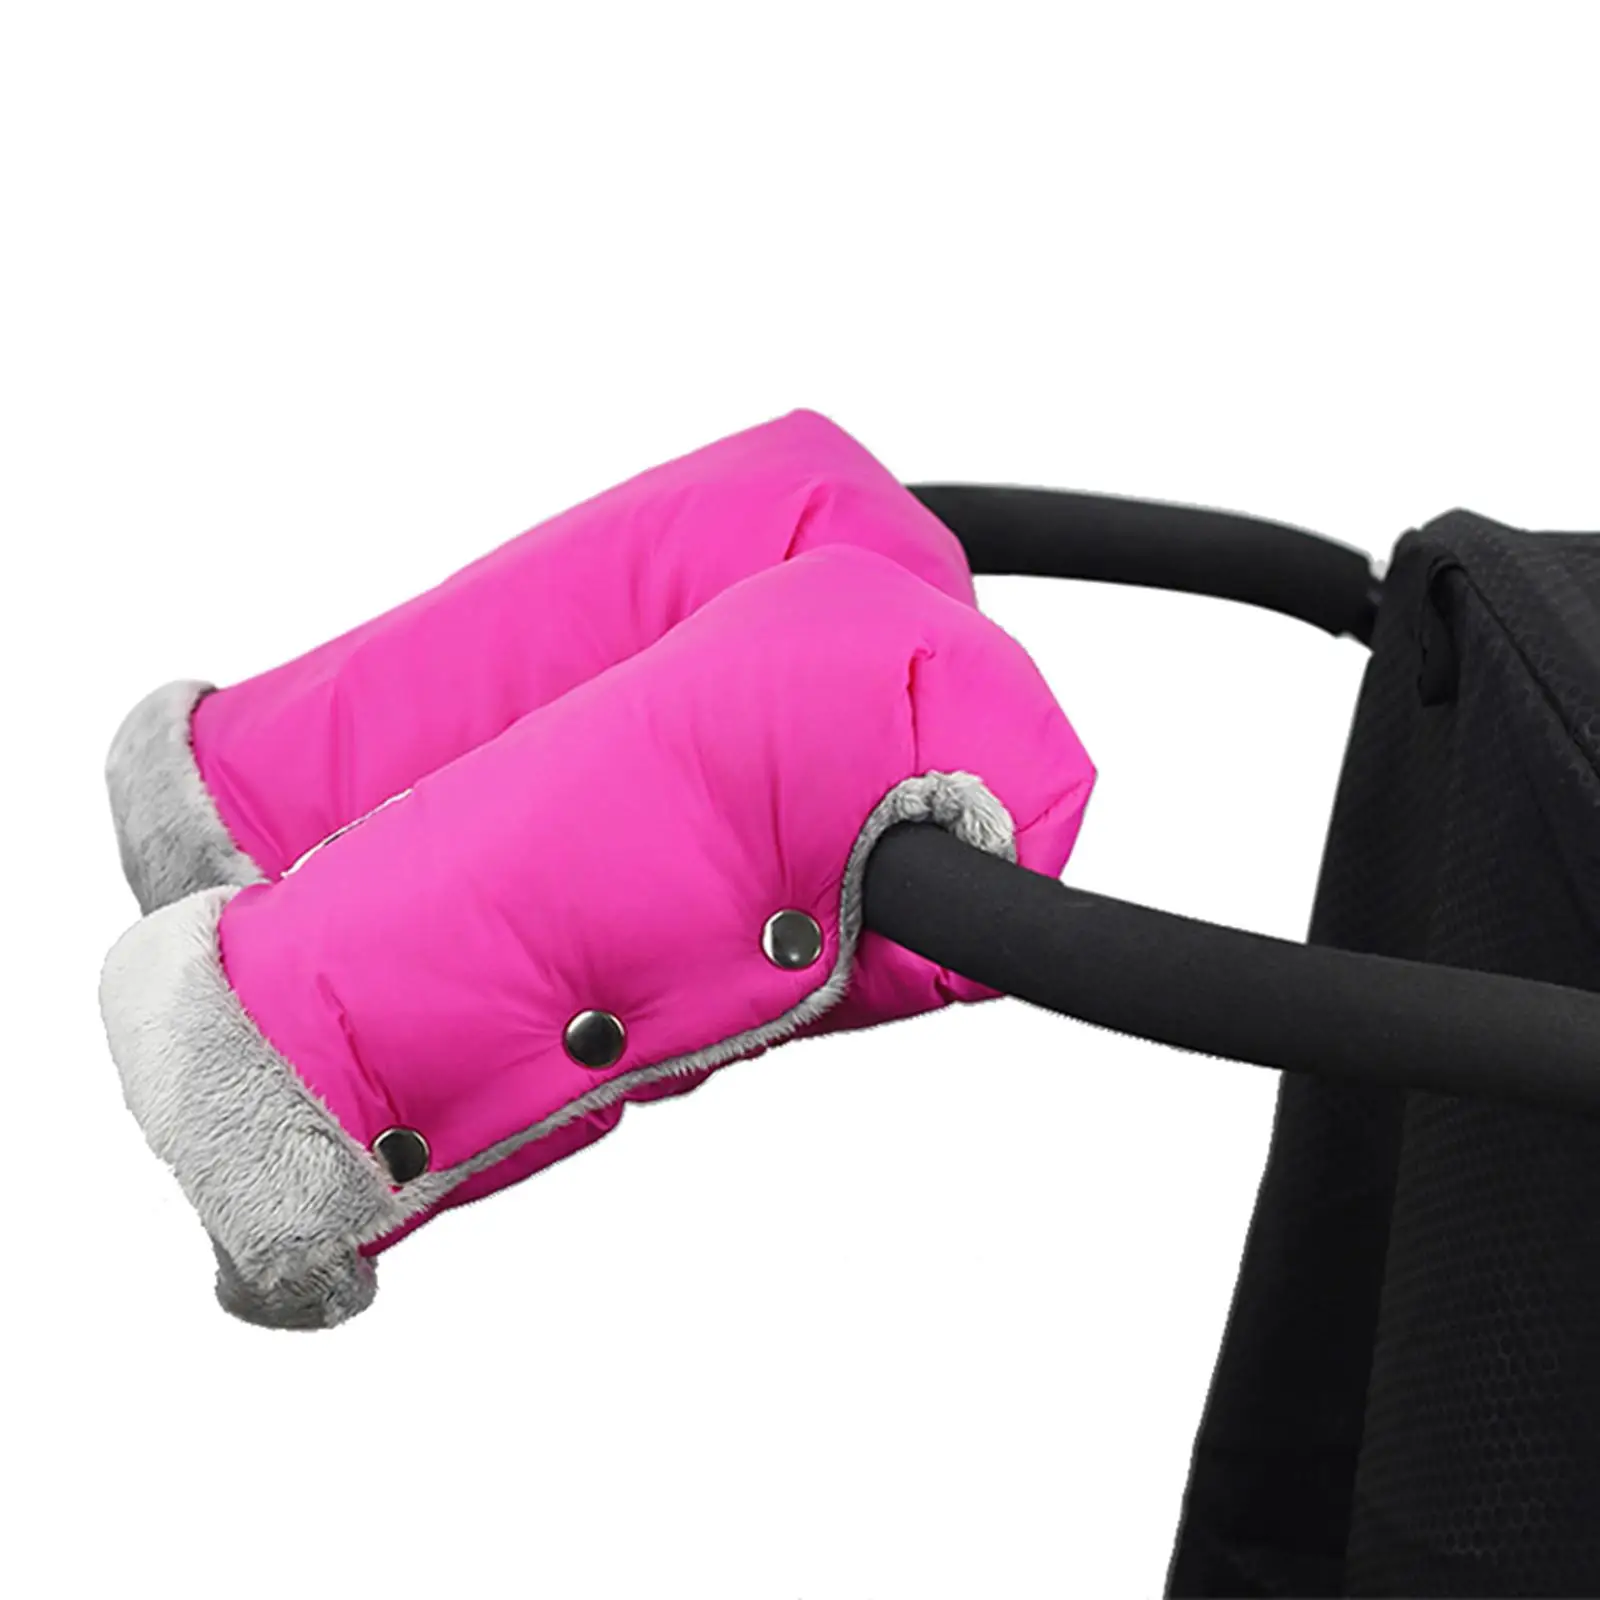 Cozy Hand Warmer for Strollers - Keep Your Hands Warm and Comfortable on Cold Days